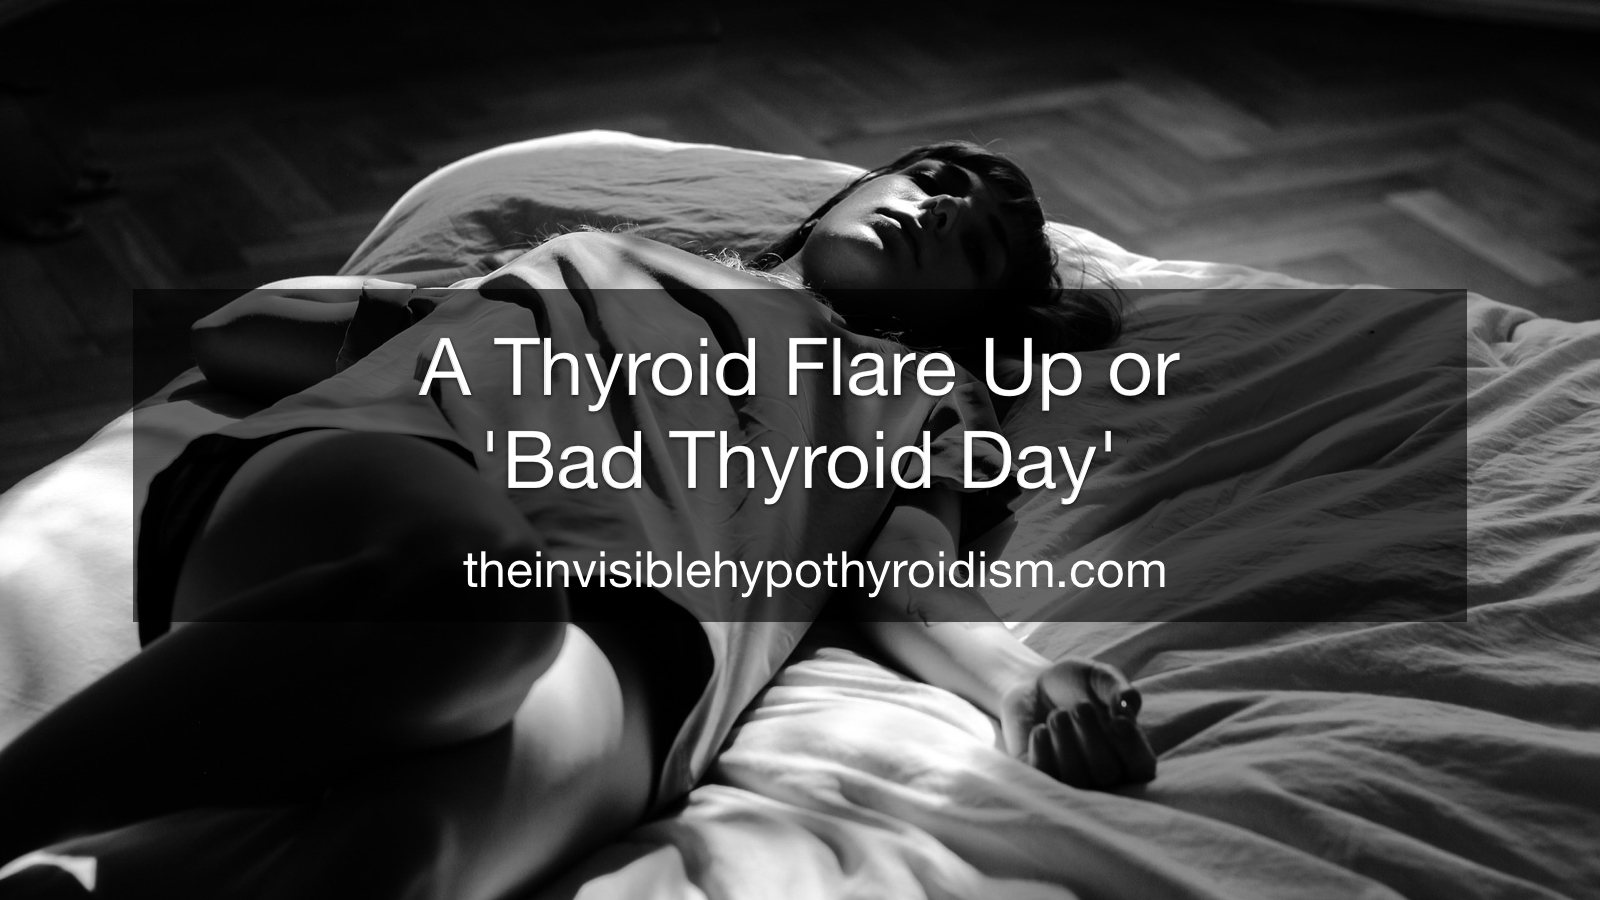 A Thyroid Flare Up or 'Bad Thyroid Day'